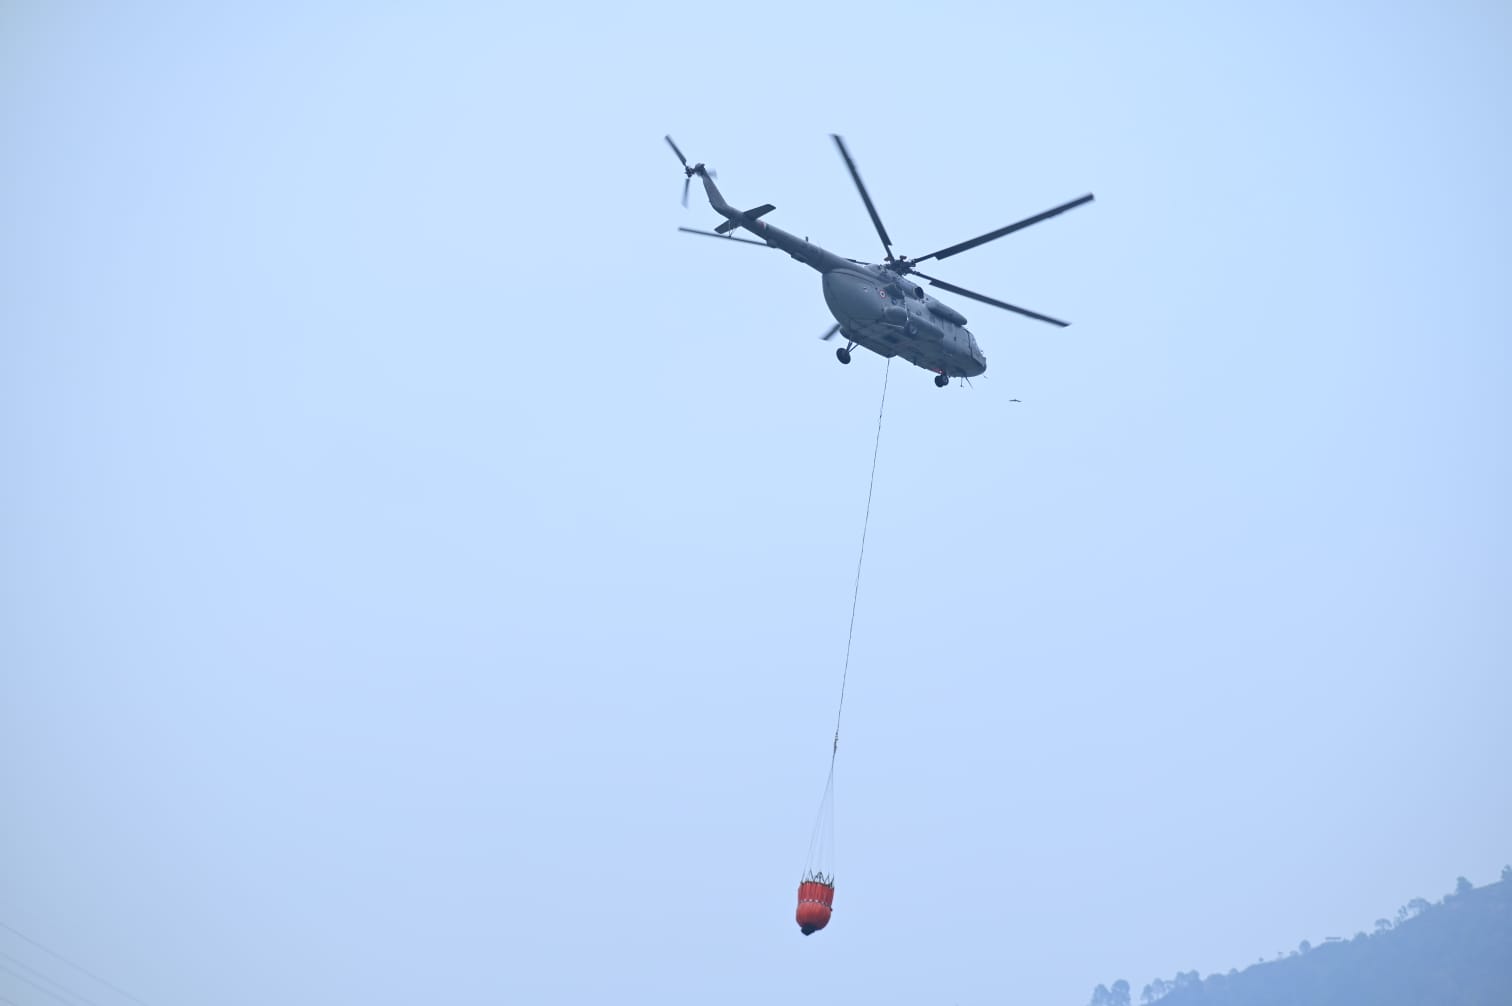 AIR FORCE EXTINGUISHING FOREST FIRE